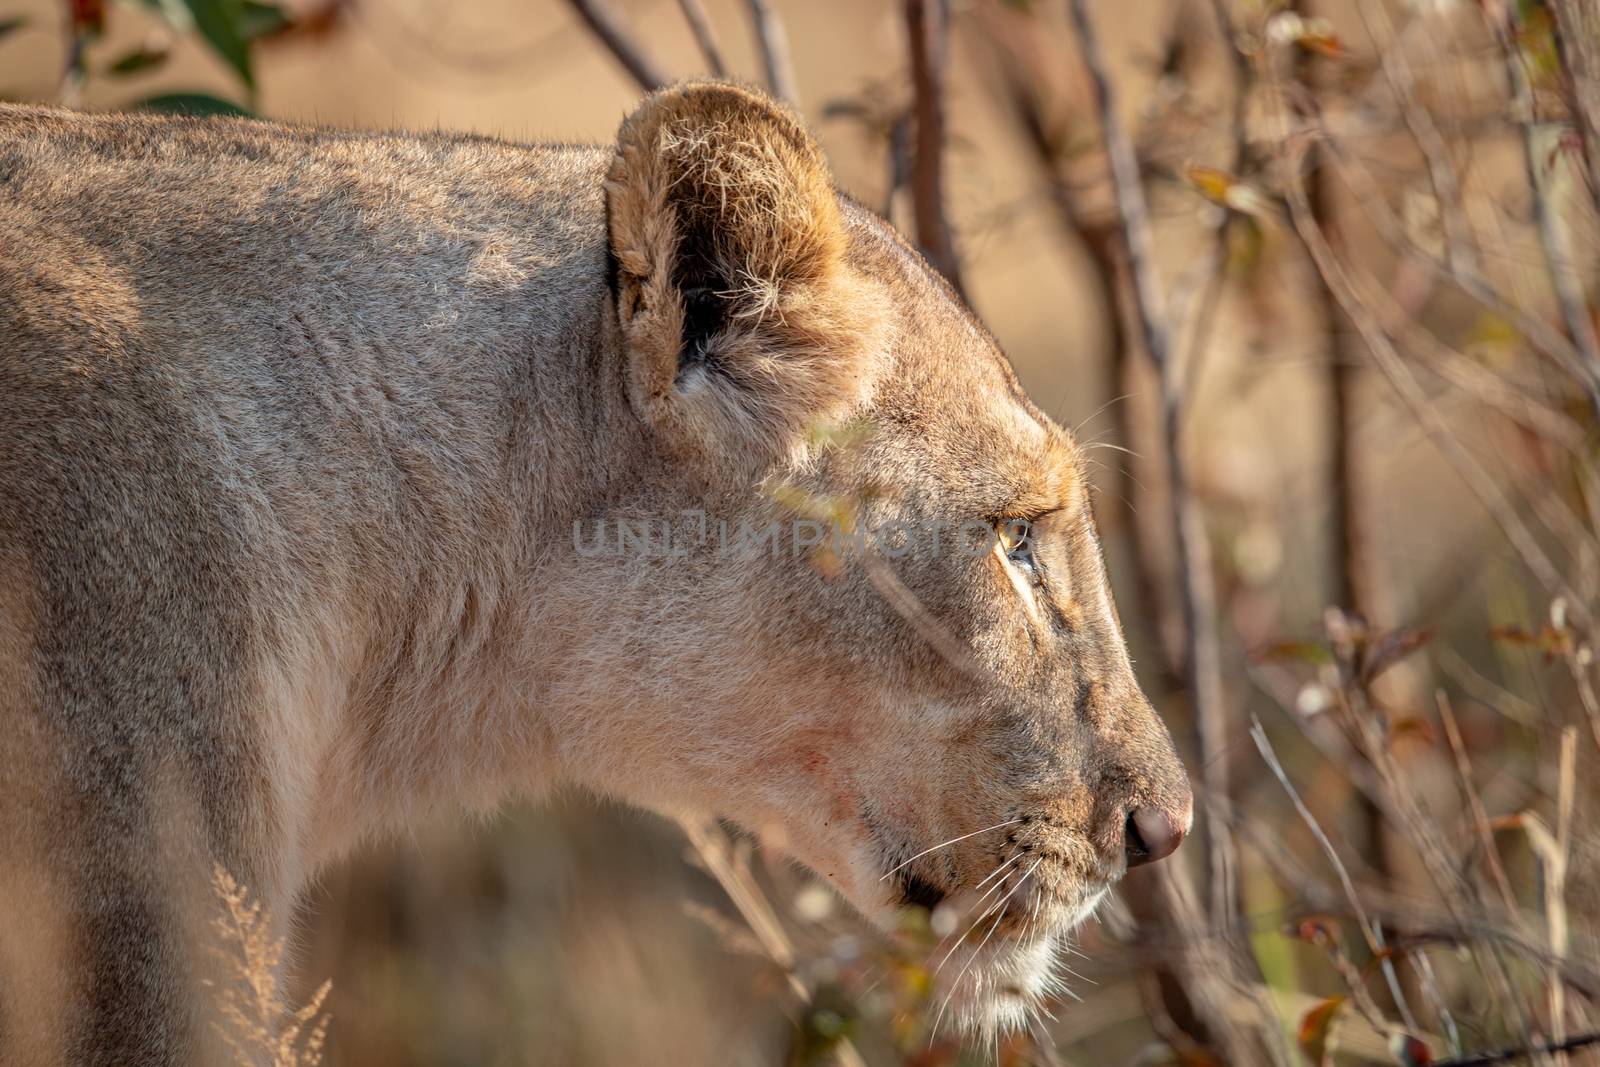 Side profile of a Lioness in the Welgevonden game reserve, South Africa.